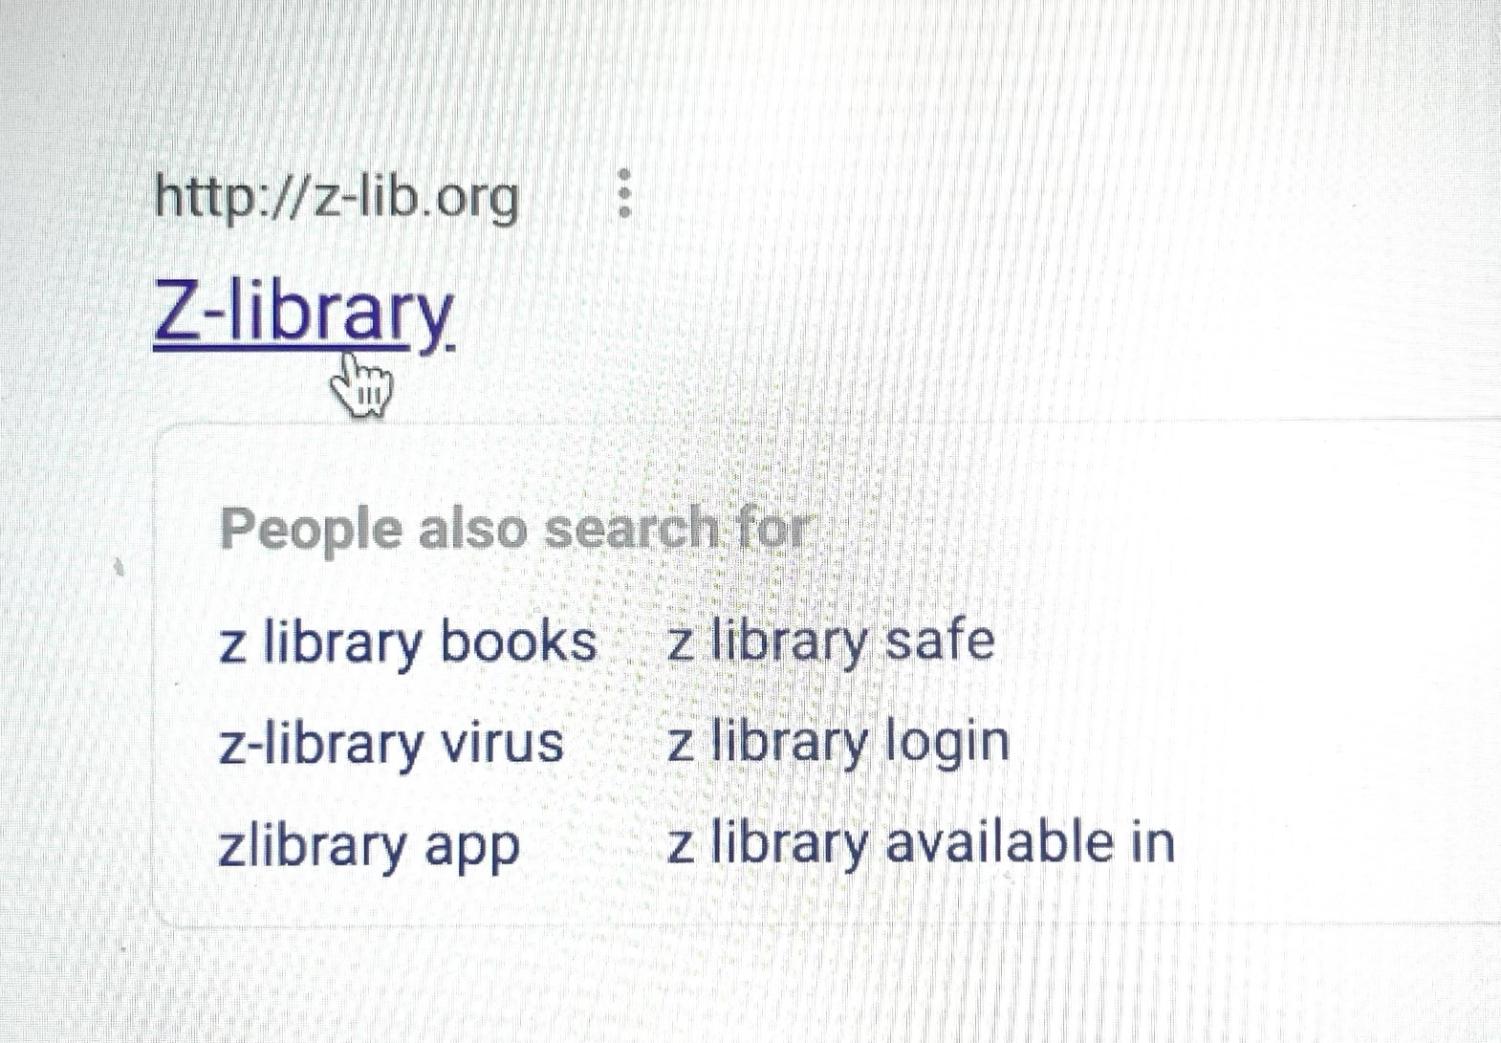 z-library-shutdown-leaves-users-scrambling-to-find-alternatives-the